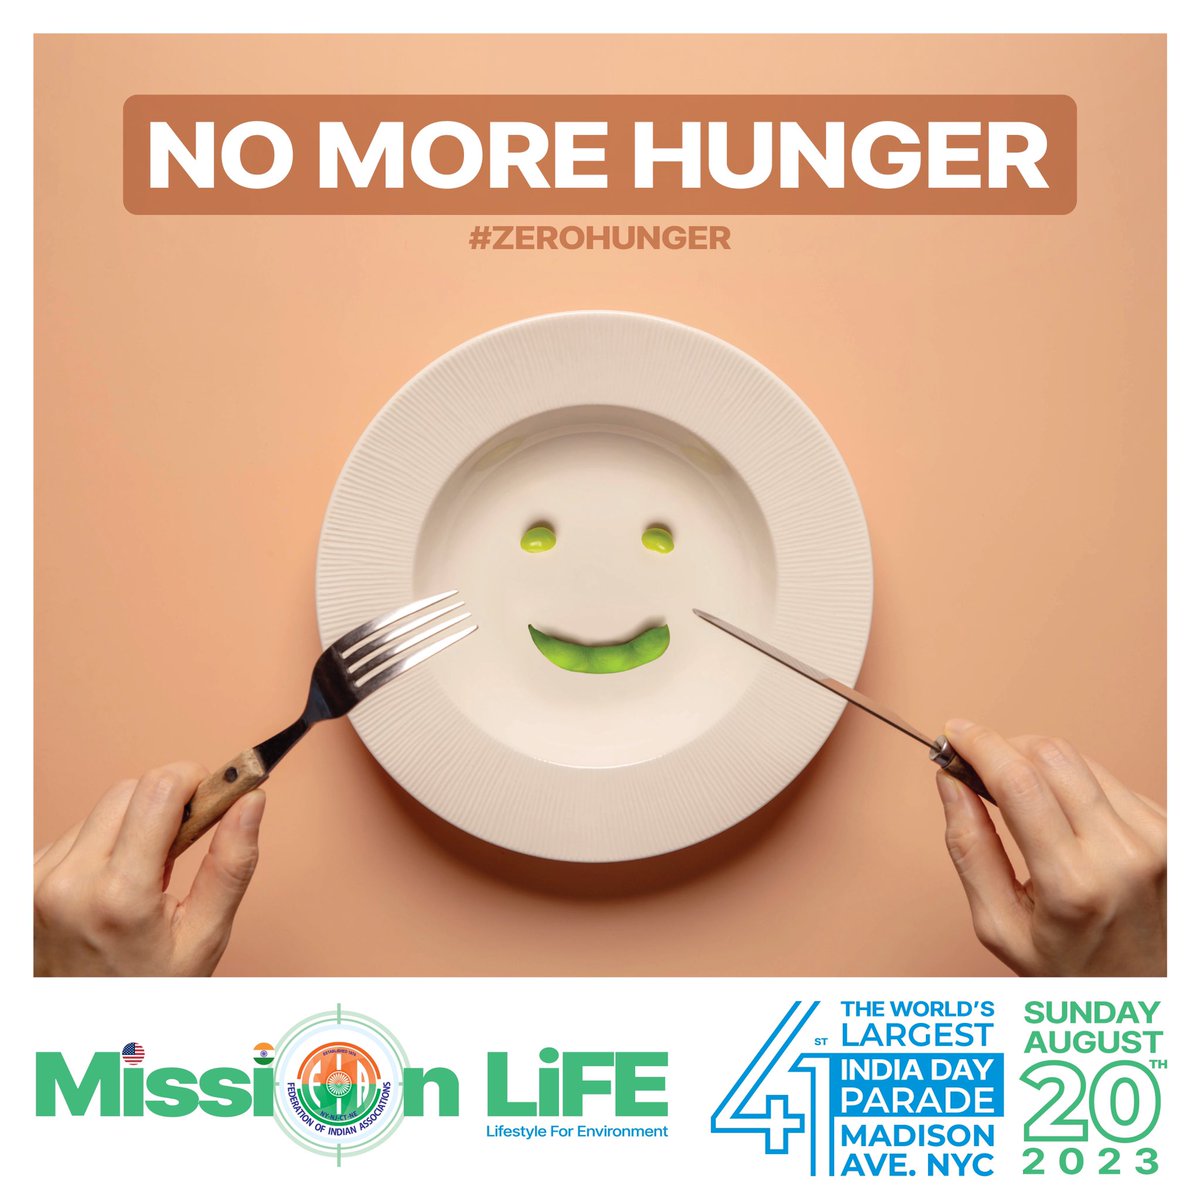 NO MORE HUNGER ❌

Let’s end hunger together 🤝

#ZeroHunger #NoMoreHunger #endhunger #donatefood #charity #small_change_big_impact #MissionLiFE #chooselife #FIA